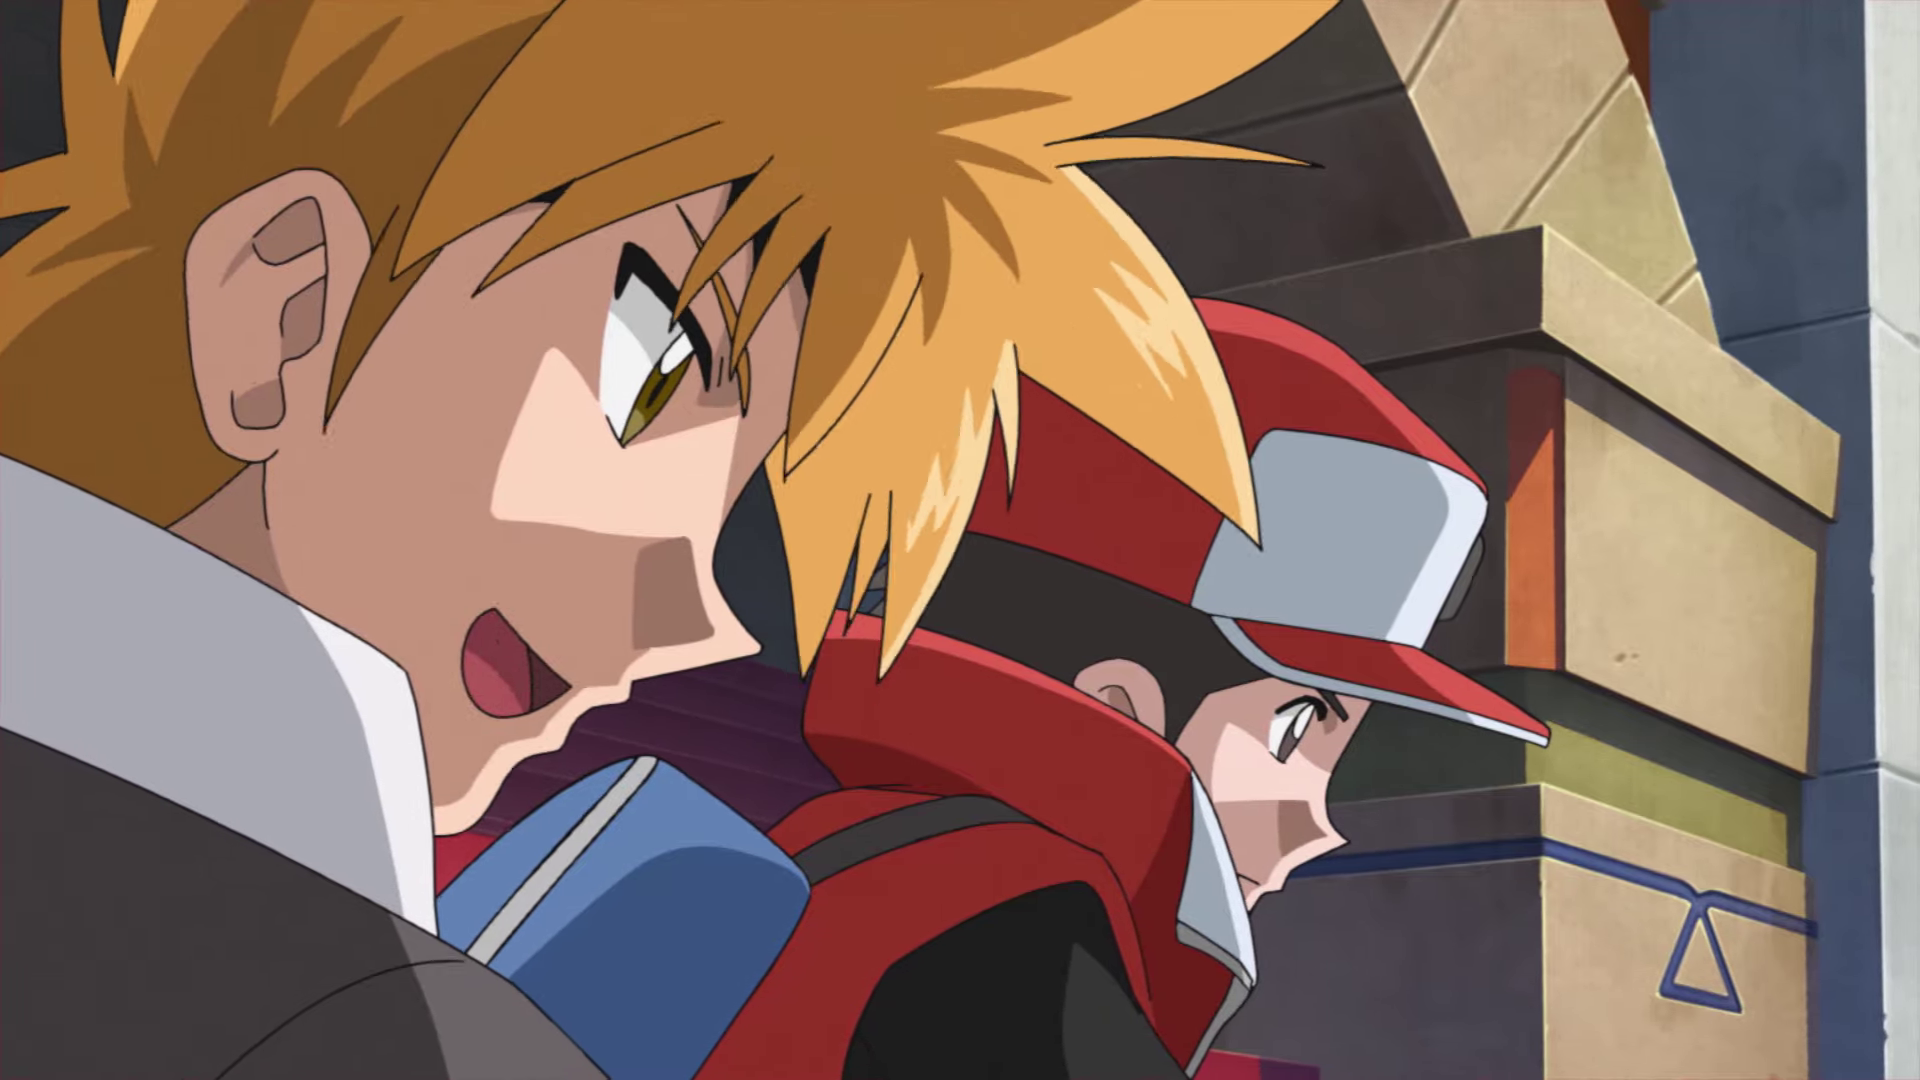 Is Ash, Red of the Red and Blue games in the anime